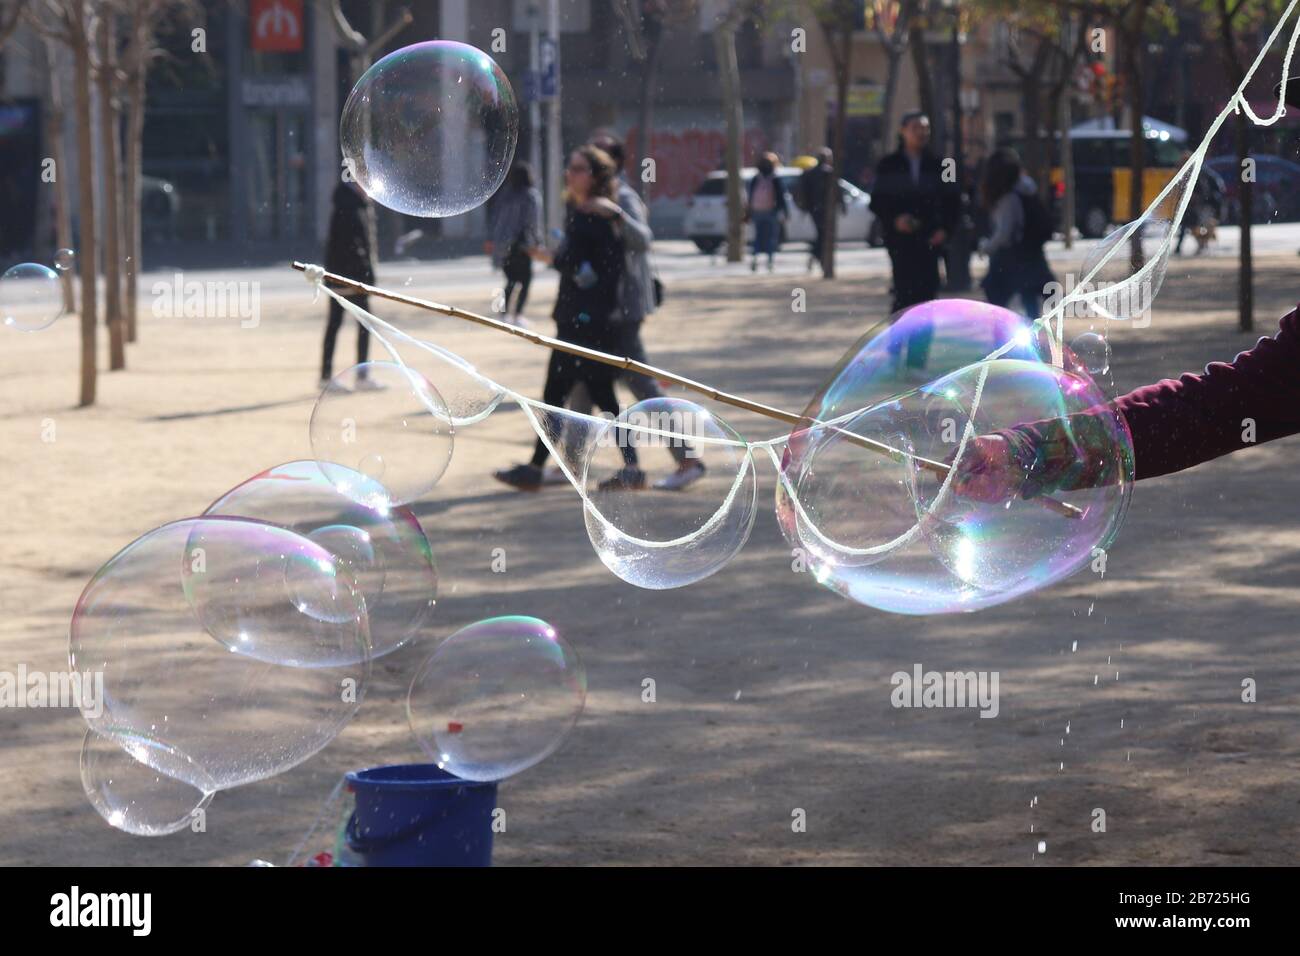 Bubbles in a park by a man, a lot of bubbles of different sizes Stock Photo